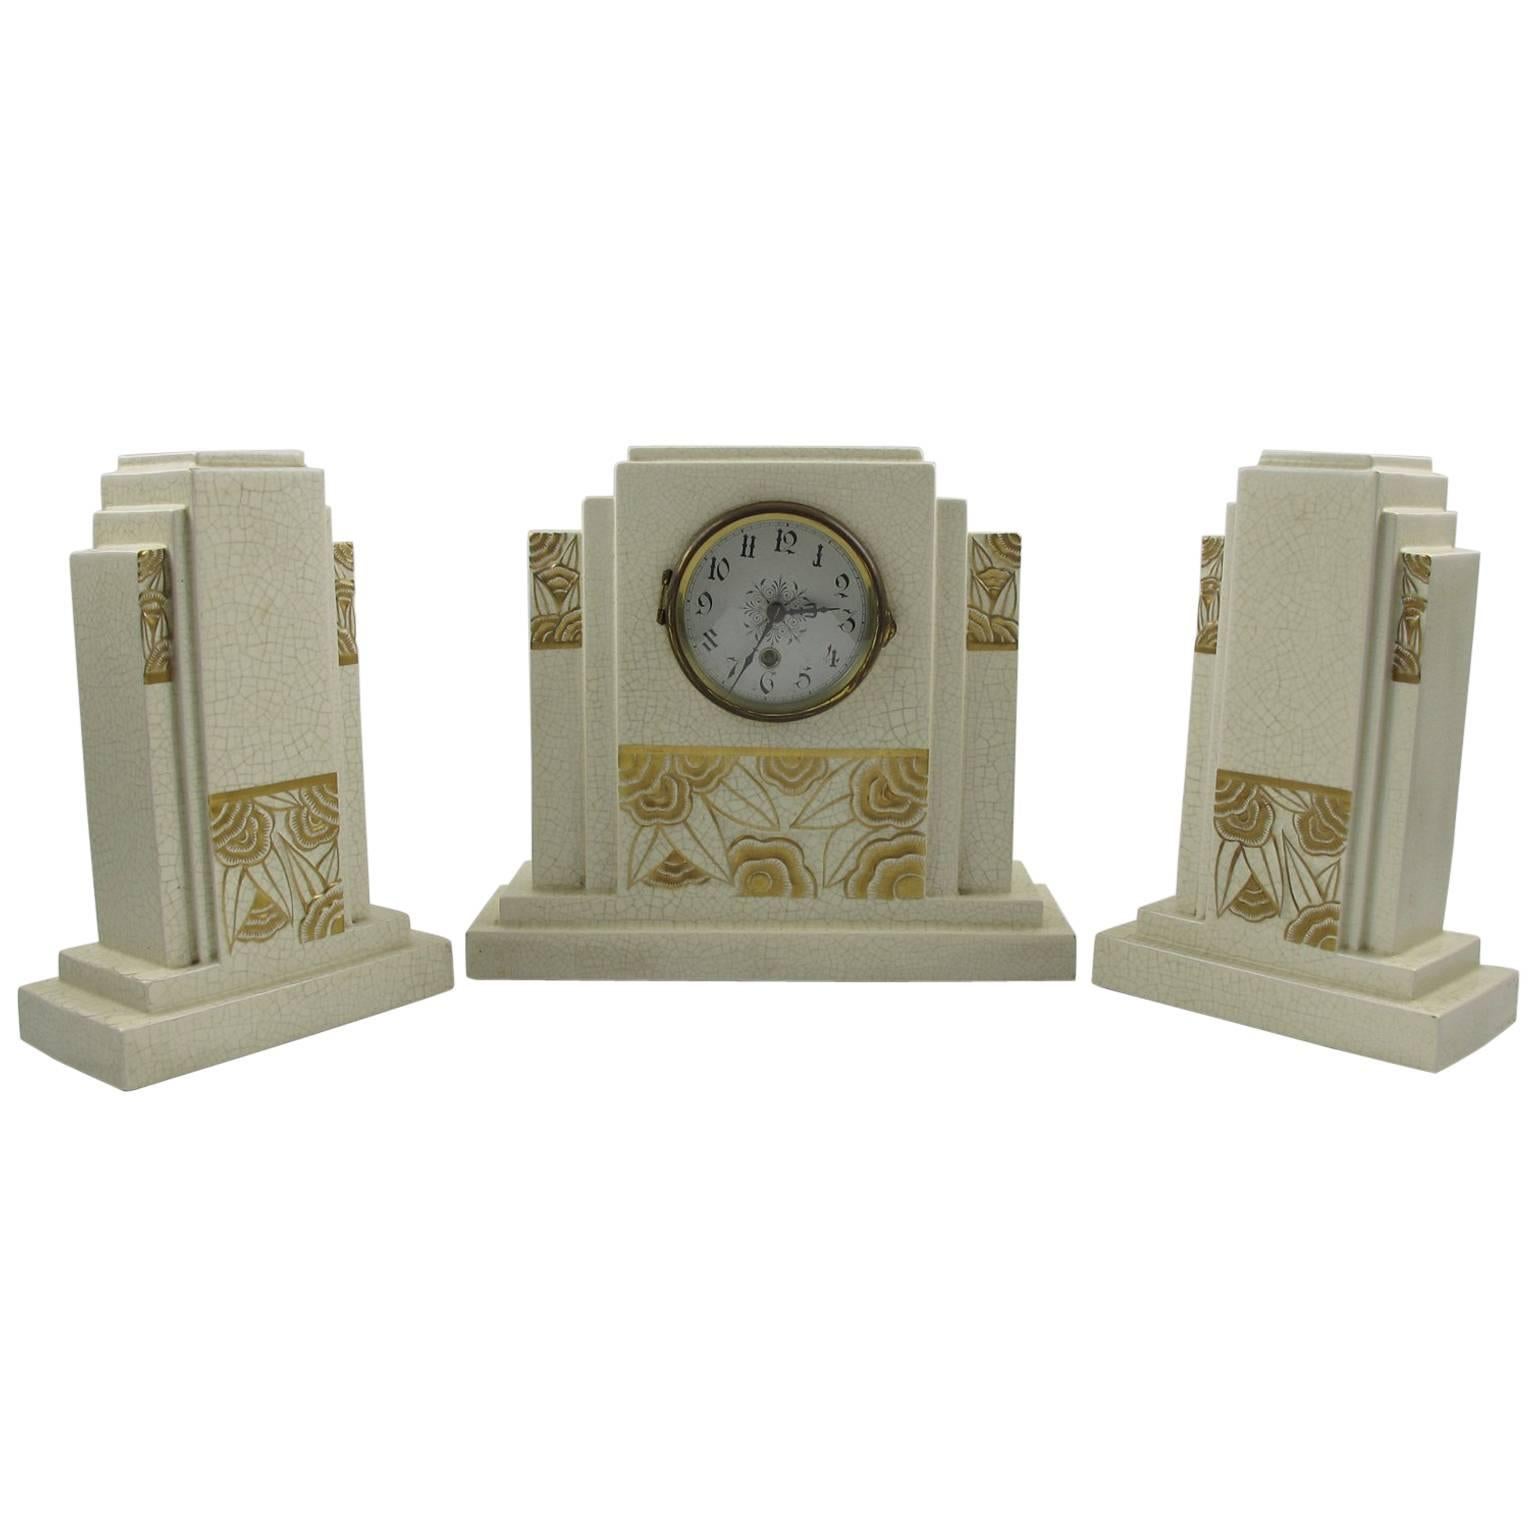 French Art Deco Crackle Ceramic Mantel Clock Set & Matching Garniture by Orchies